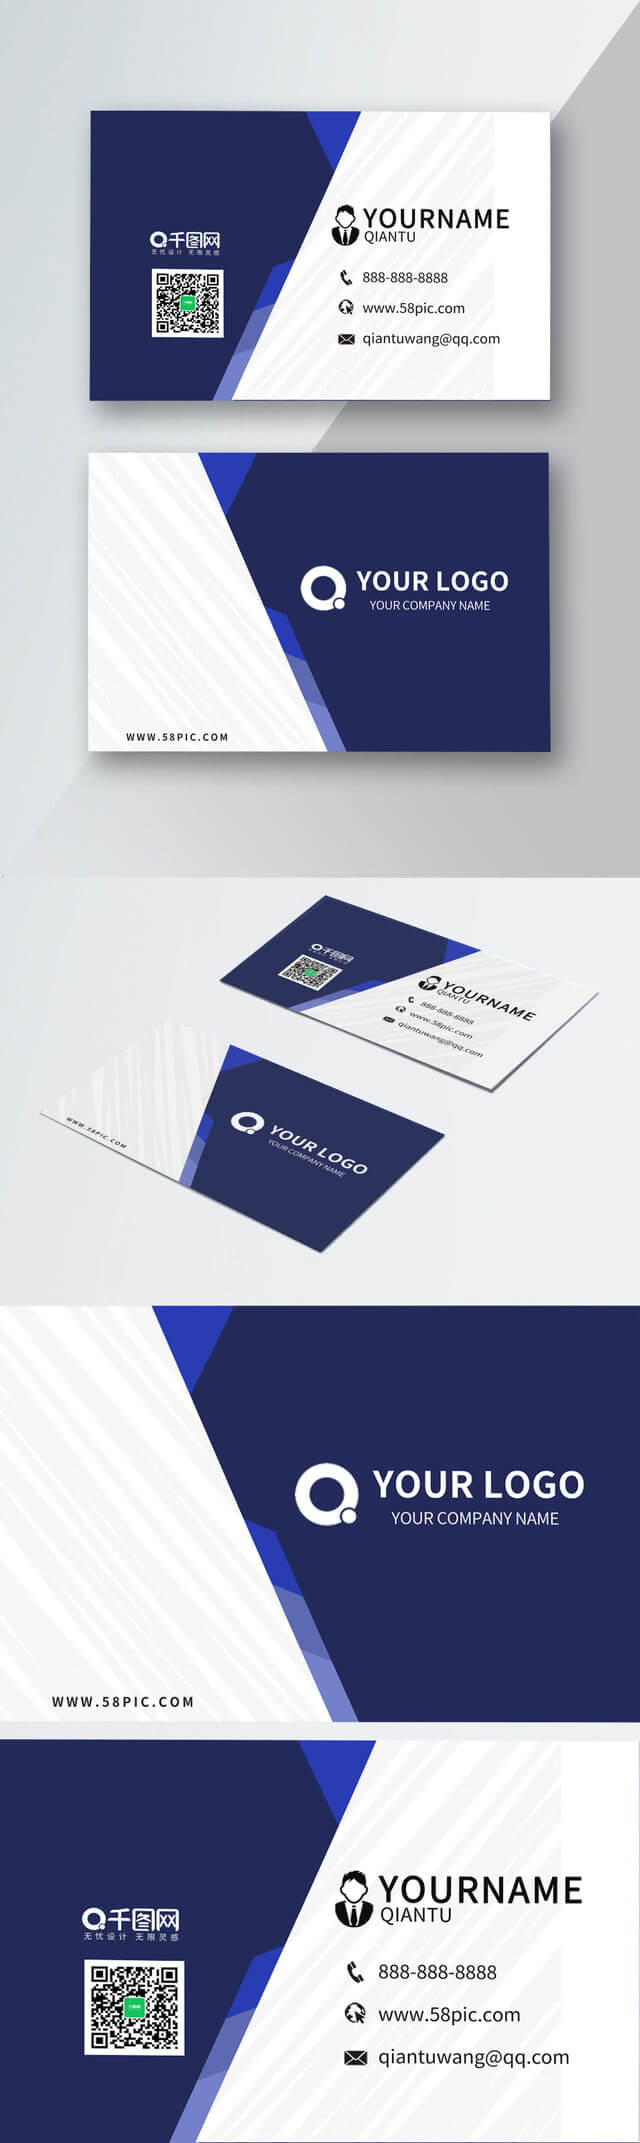 Transport Business Card Express Business Card Car Vehicle With Regard To Transport Business Cards Templates Free